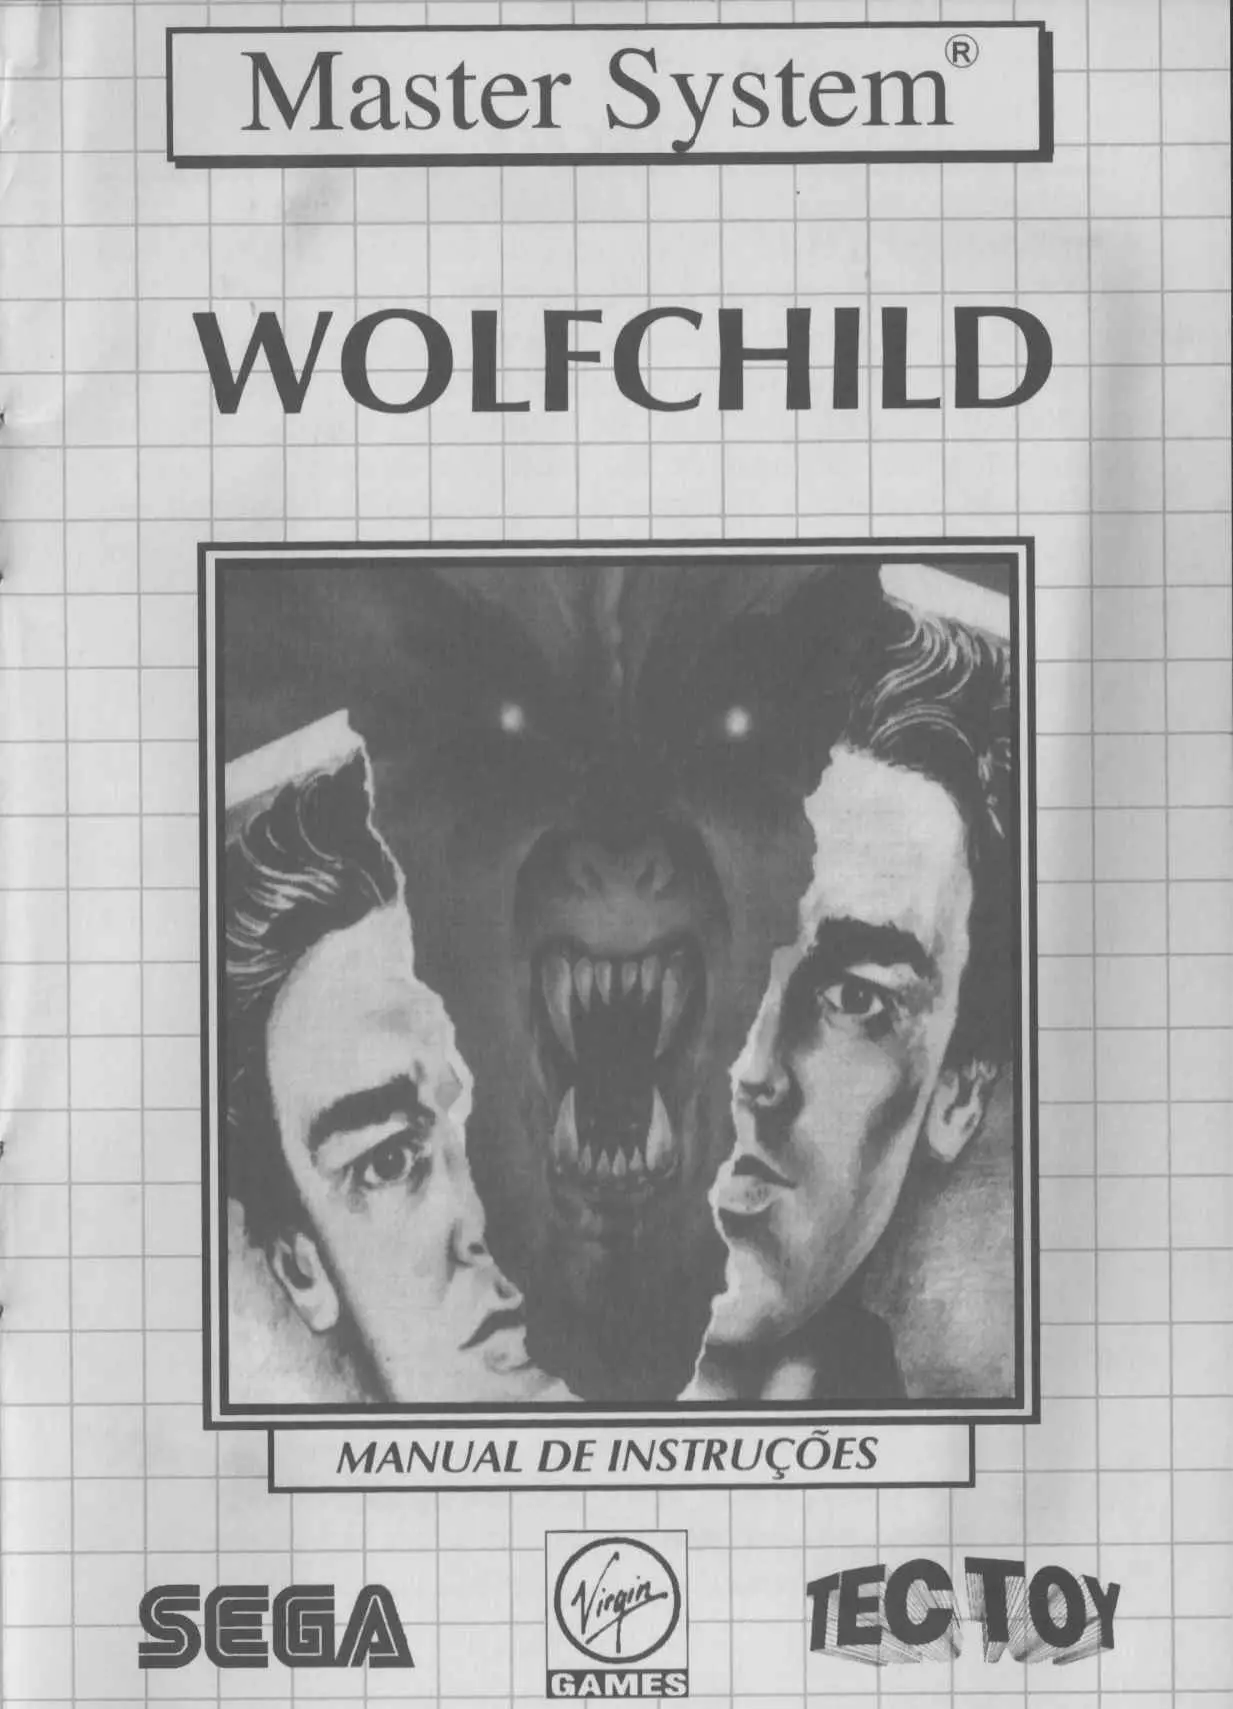 manual for Wolfchild